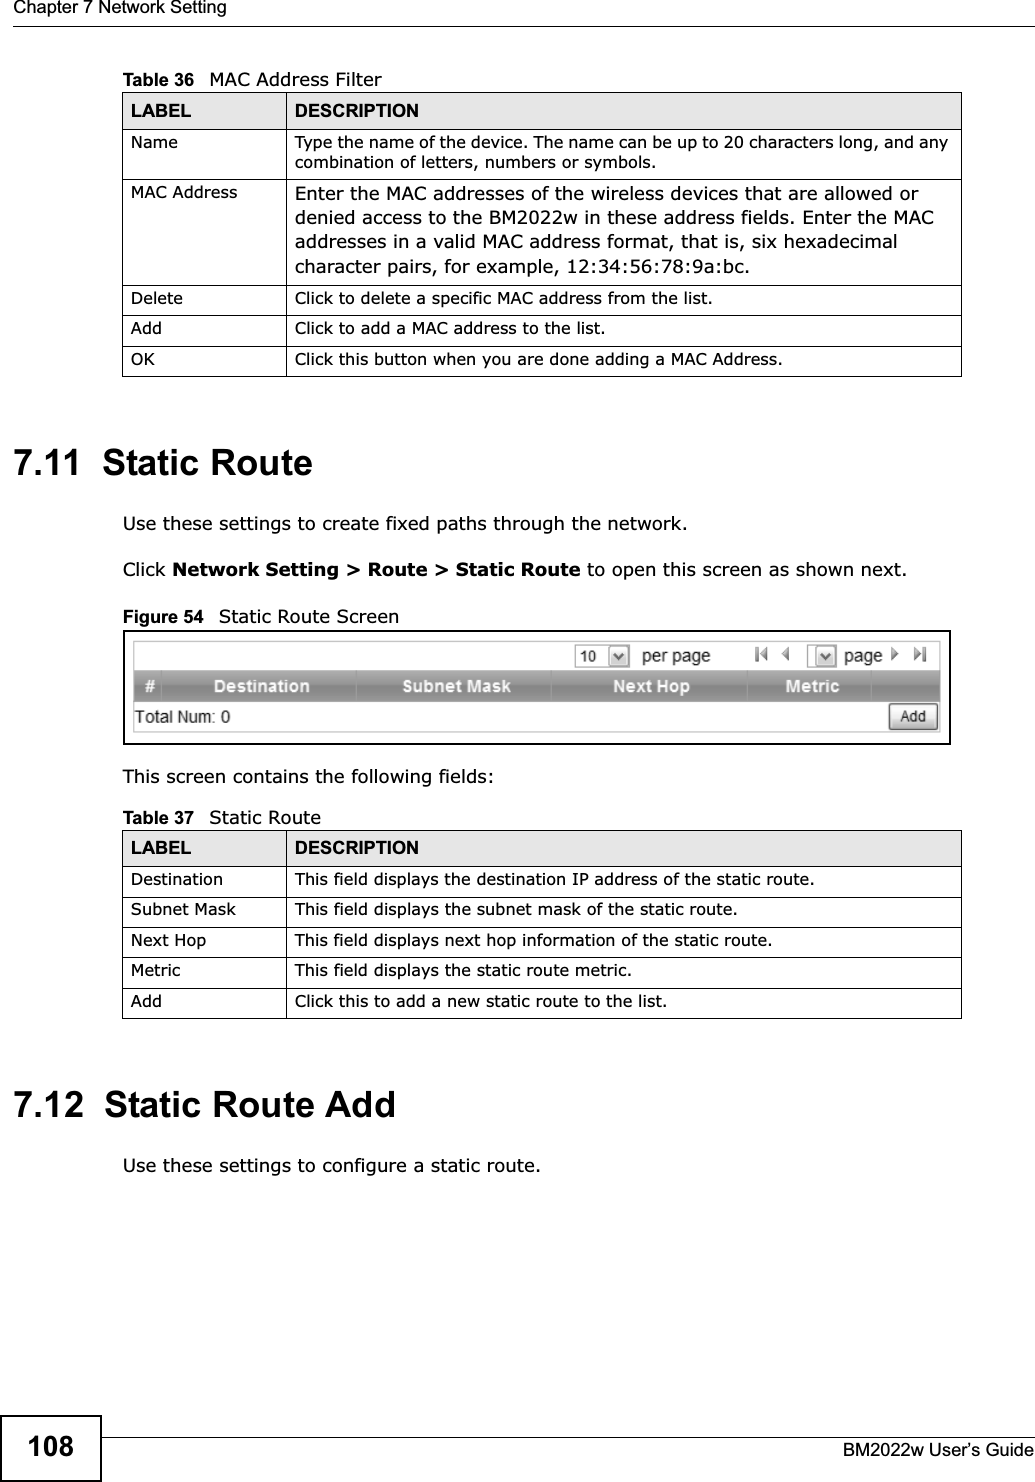 Chapter 7 Network SettingBM2022w User’s Guide1087.11  Static RouteUse these settings to create fixed paths through the network.Click Network Setting &gt; Route &gt; Static Route to open this screen as shown next.Figure 54   Static Route ScreenThis screen contains the following fields:7.12  Static Route AddUse these settings to configure a static route.Name Type the name of the device. The name can be up to 20 characters long, and any combination of letters, numbers or symbols.MAC Address Enter the MAC addresses of the wireless devices that are allowed or denied access to the BM2022w in these address fields. Enter the MAC addresses in a valid MAC address format, that is, six hexadecimal character pairs, for example, 12:34:56:78:9a:bc.Delete Click to delete a specific MAC address from the list.Add Click to add a MAC address to the list.OK Click this button when you are done adding a MAC Address.Table 36   MAC Address FilterLABEL DESCRIPTIONTable 37   Static RouteLABEL DESCRIPTIONDestination This field displays the destination IP address of the static route.Subnet Mask This field displays the subnet mask of the static route.Next Hop This field displays next hop information of the static route.Metric This field displays the static route metric.Add Click this to add a new static route to the list.